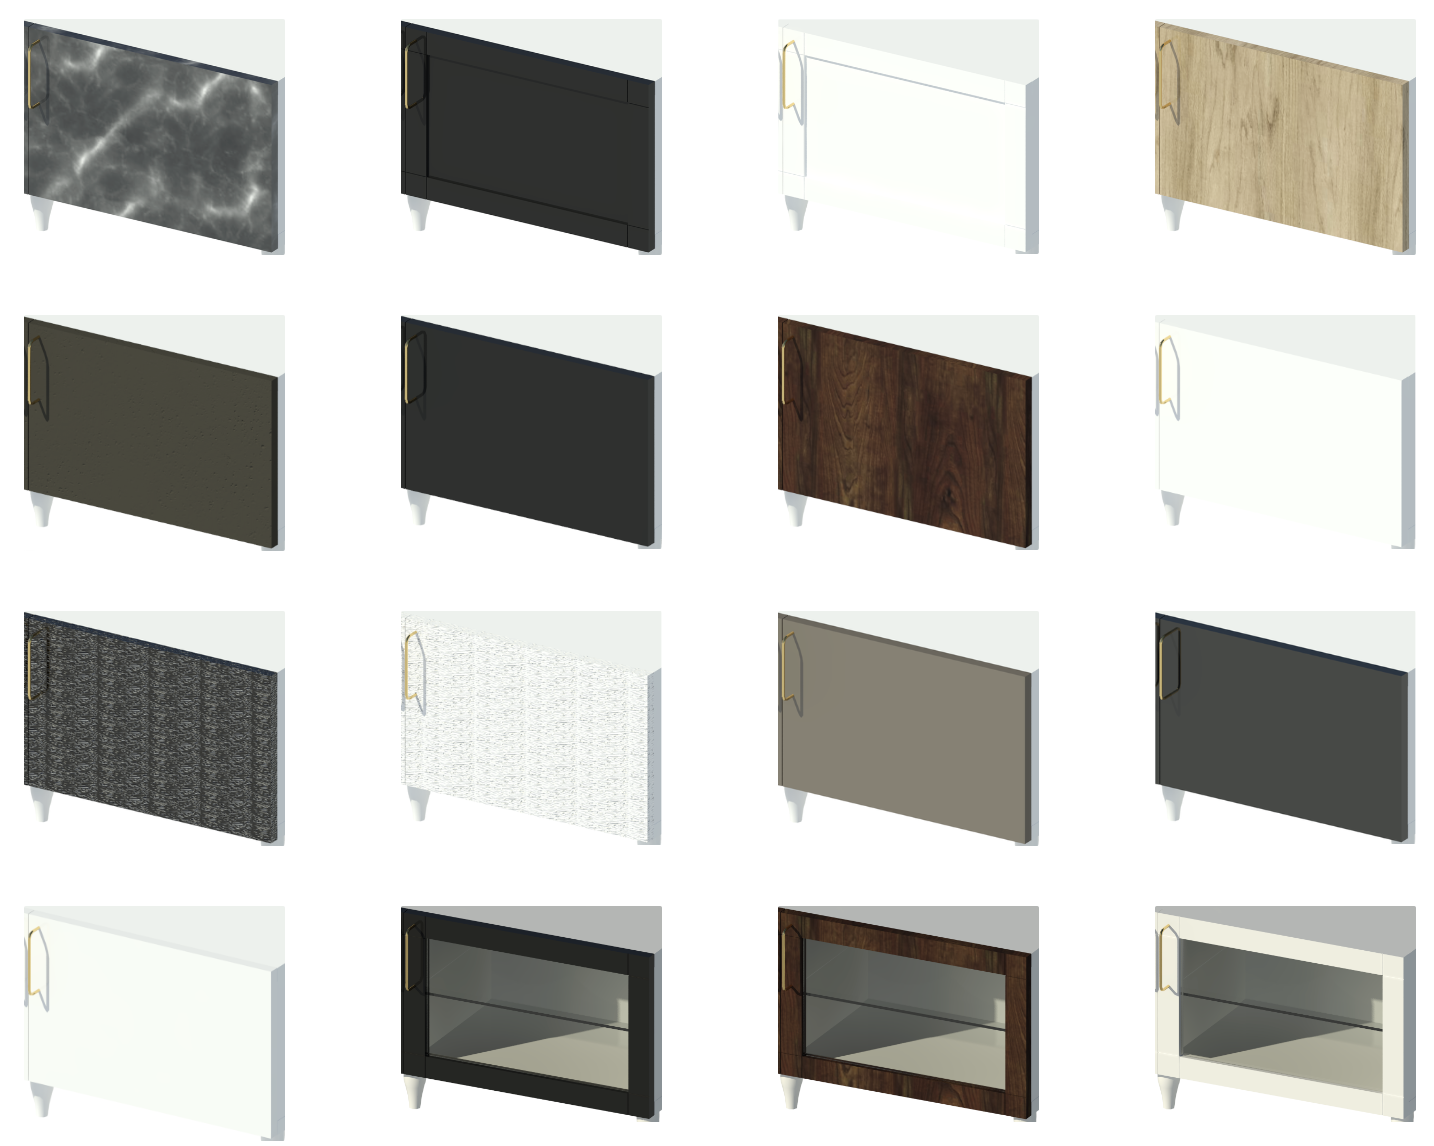 Revit render of 16 types of door styles including dark grey, black, white, oak, stained oak, beige and with glass panes. All paired with brass BAGGANÄS handles. 